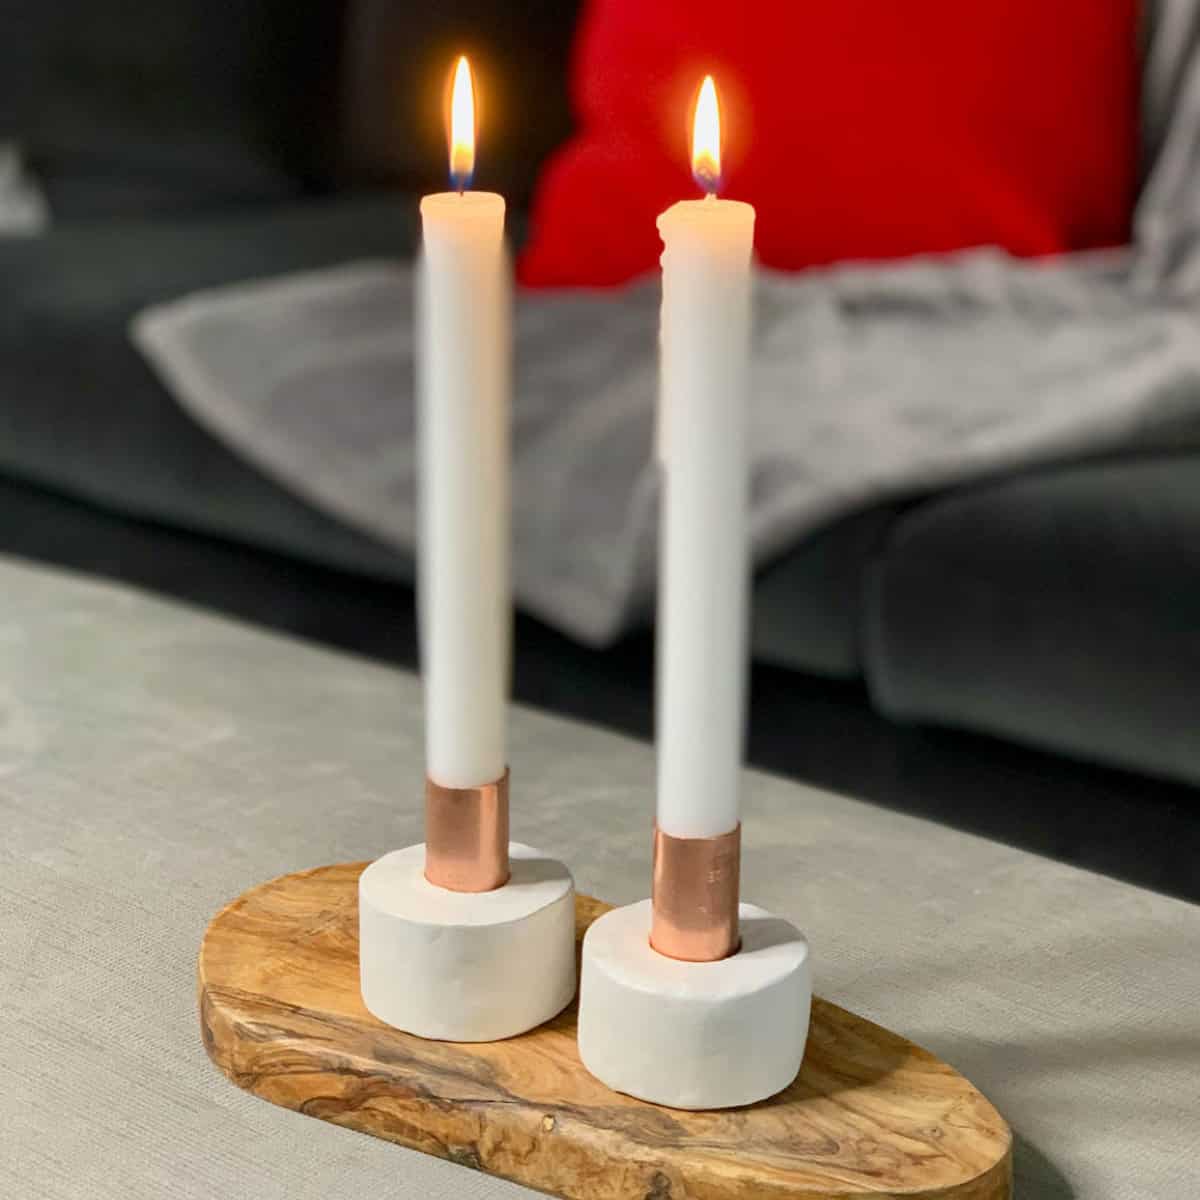 DIY Clay Candlestick Holders